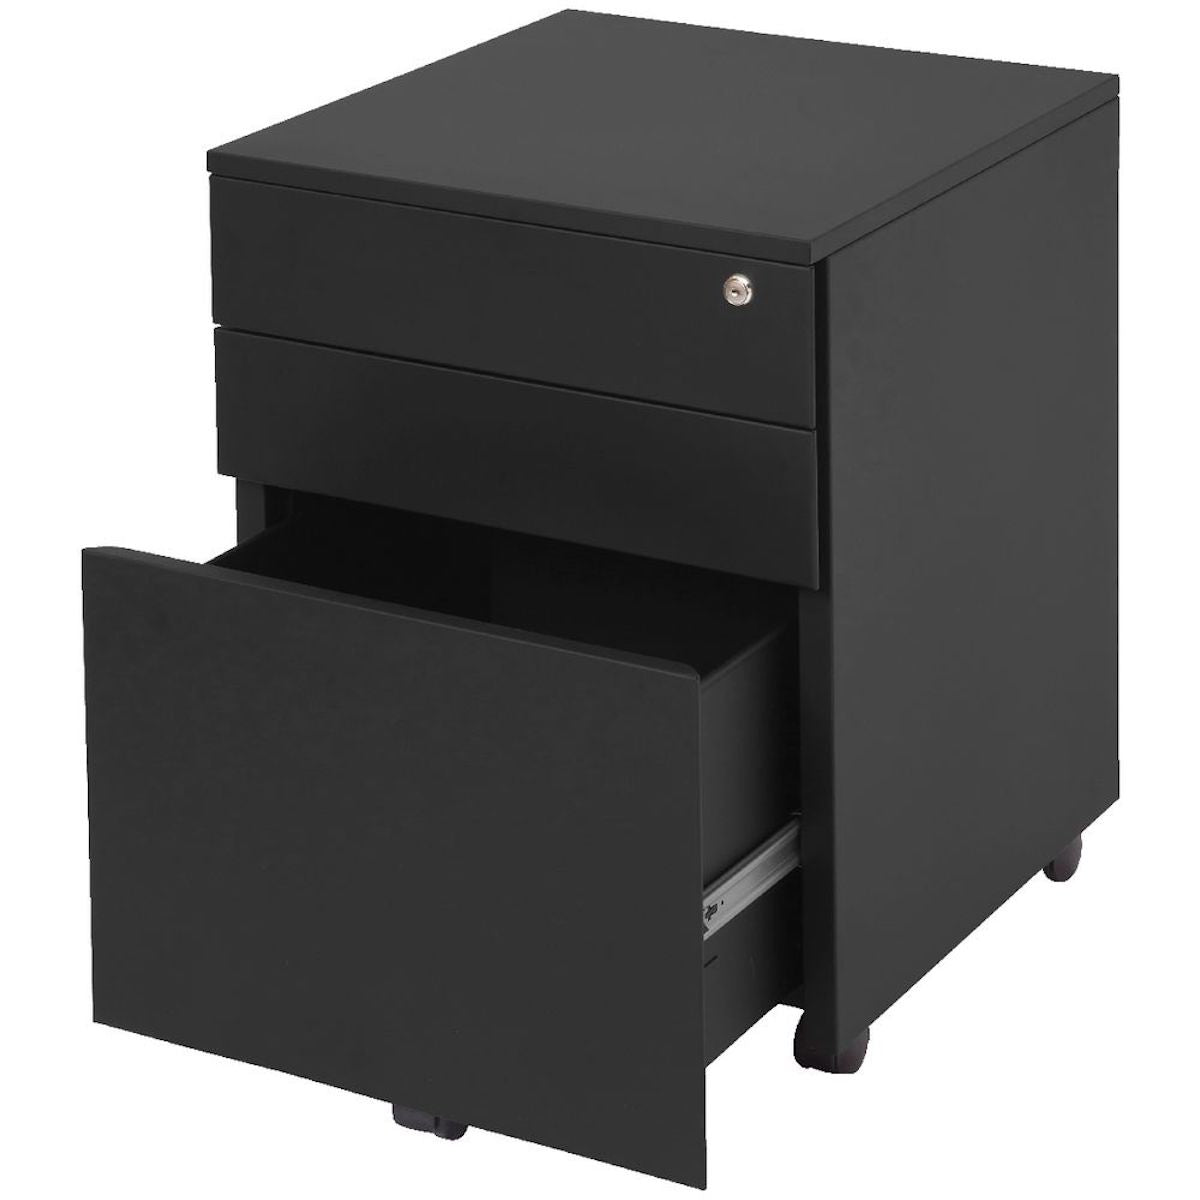 ERGOWORKS - EW-2D1F - 3 DRAWERS MOBILE PEDESTAL WITH KEY LOCK AND CASTORS  (W407 X D475 X H665MM)